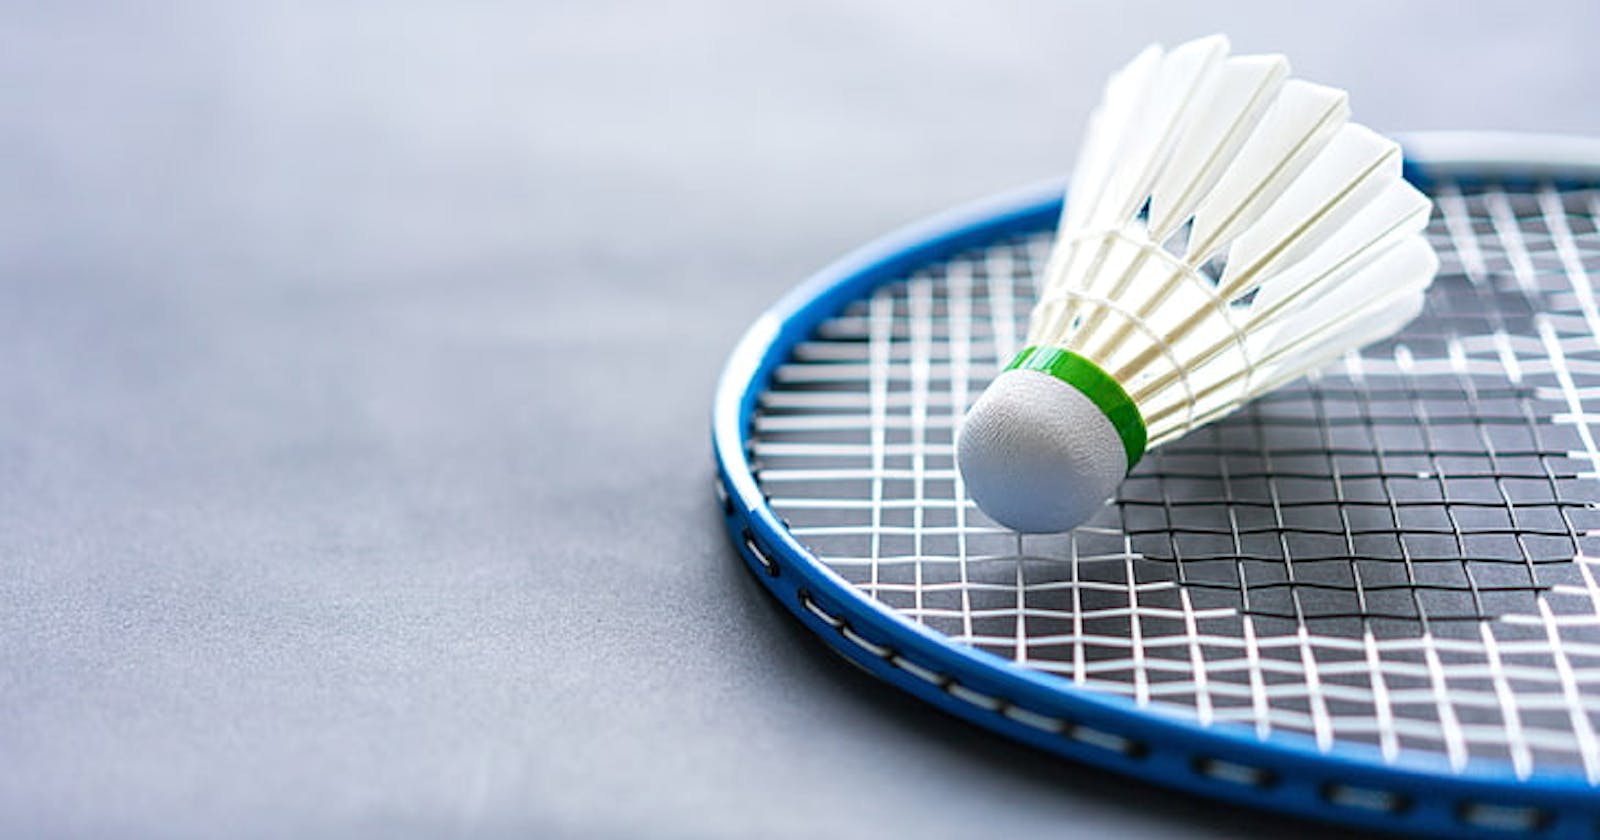 Iphone Xs Badminton Wallpapers: Top 3 Collections